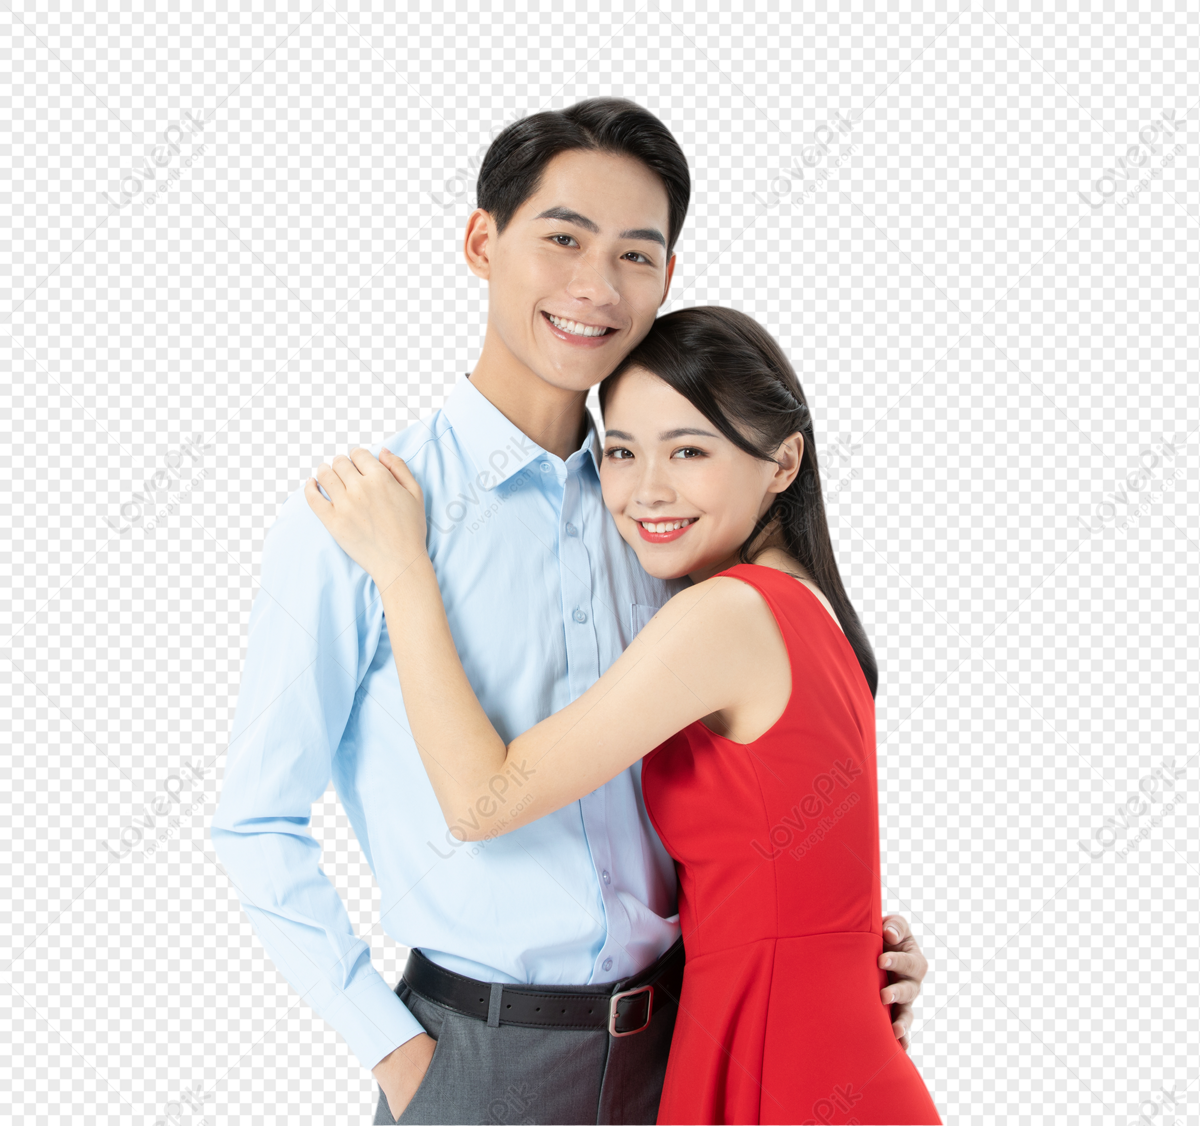 Couple Hugging Each Other Png Free Download And Clipart Image For Free Download Lovepik 